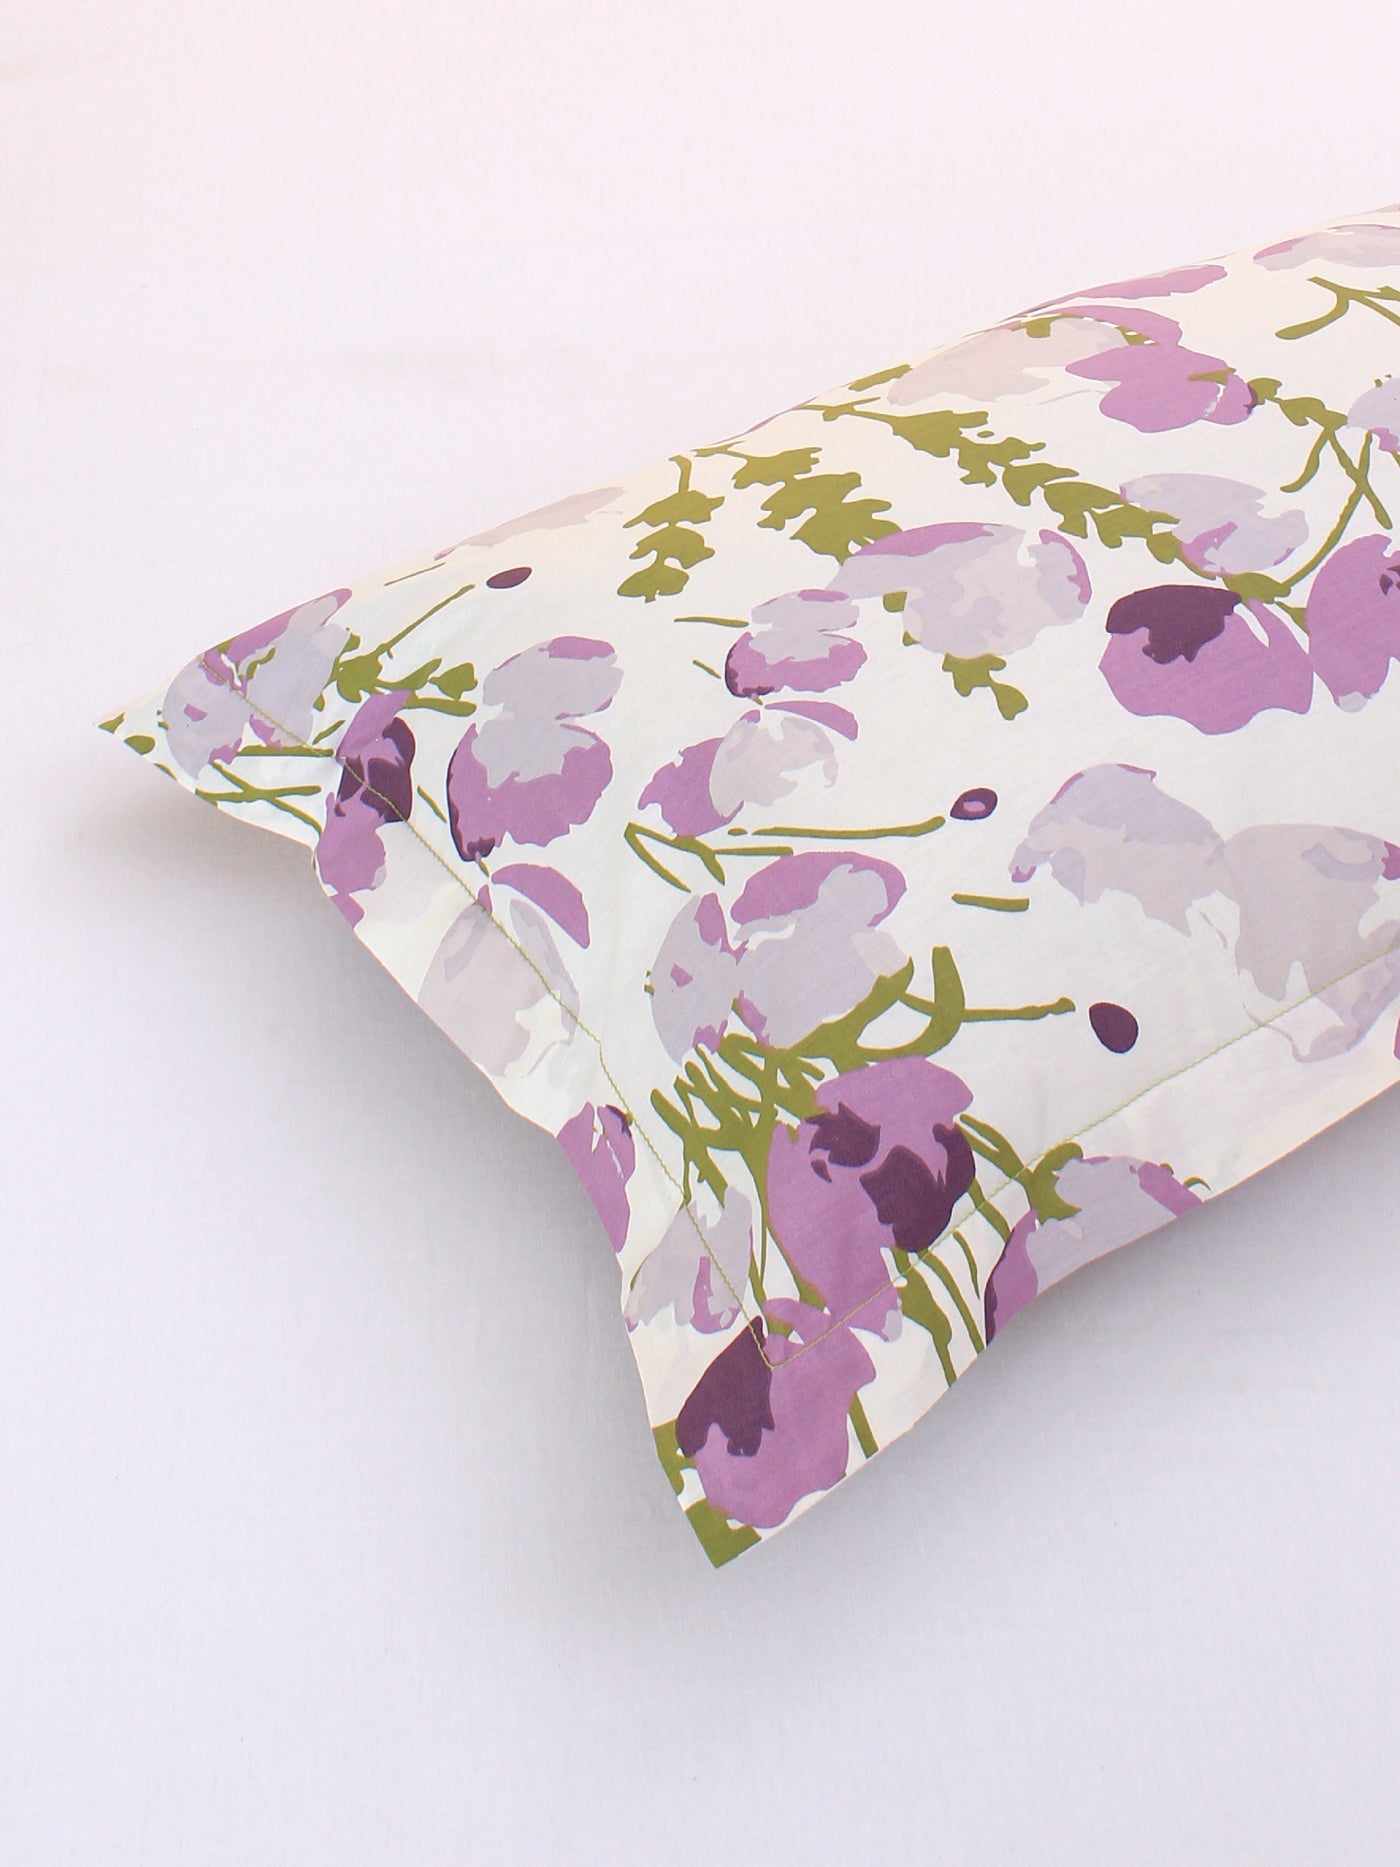 Himalayan Poppies Pillow Cover (Purple)